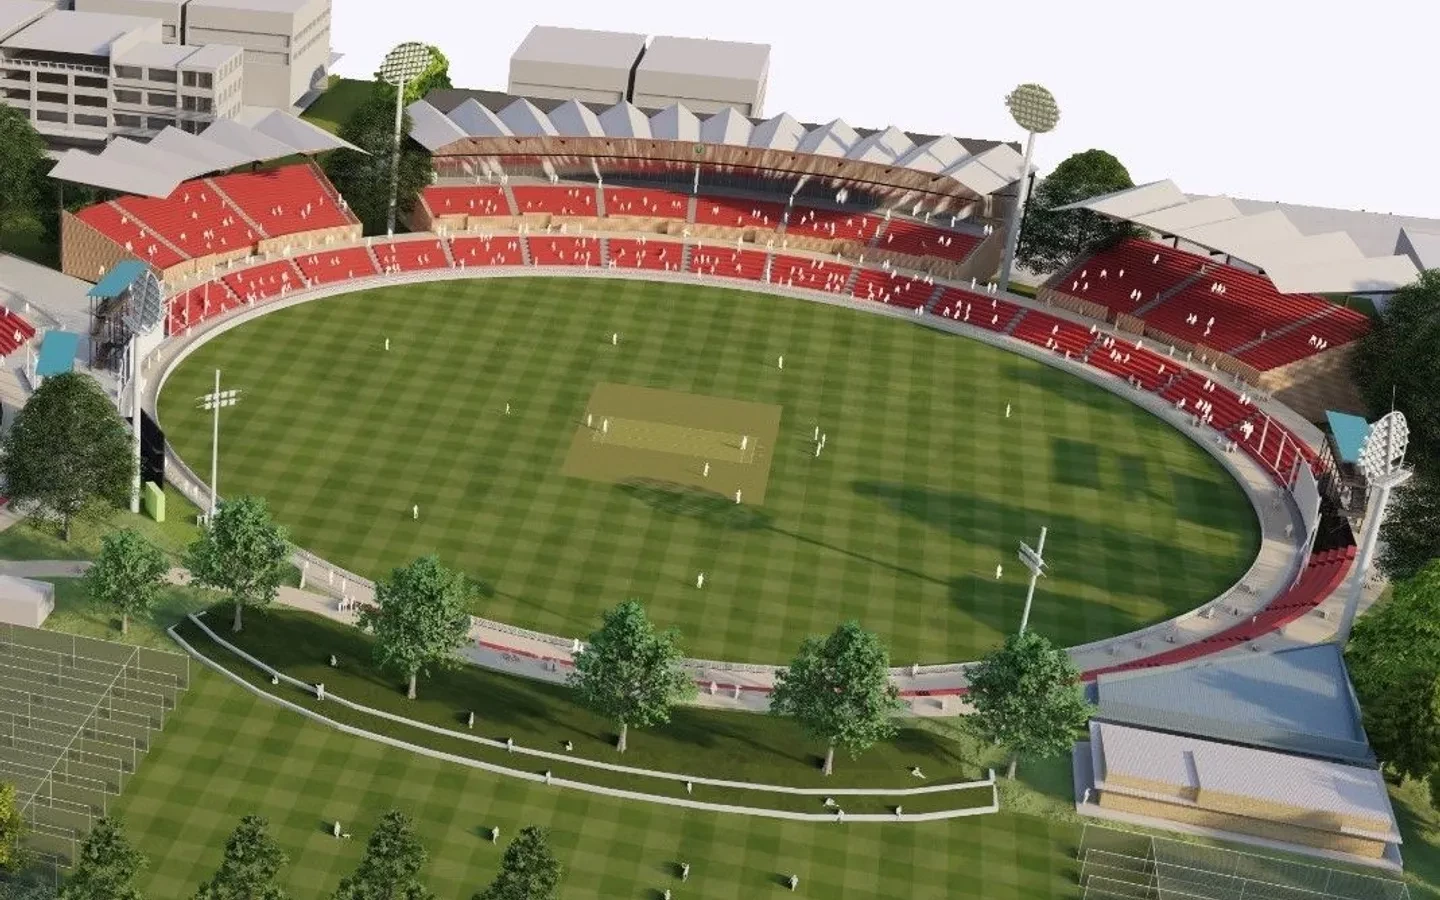 Queensland Cricket's vision for the Allan Border Field sees the seating capacity increase from 6,500 to 10,000 ©Queensland Cricket